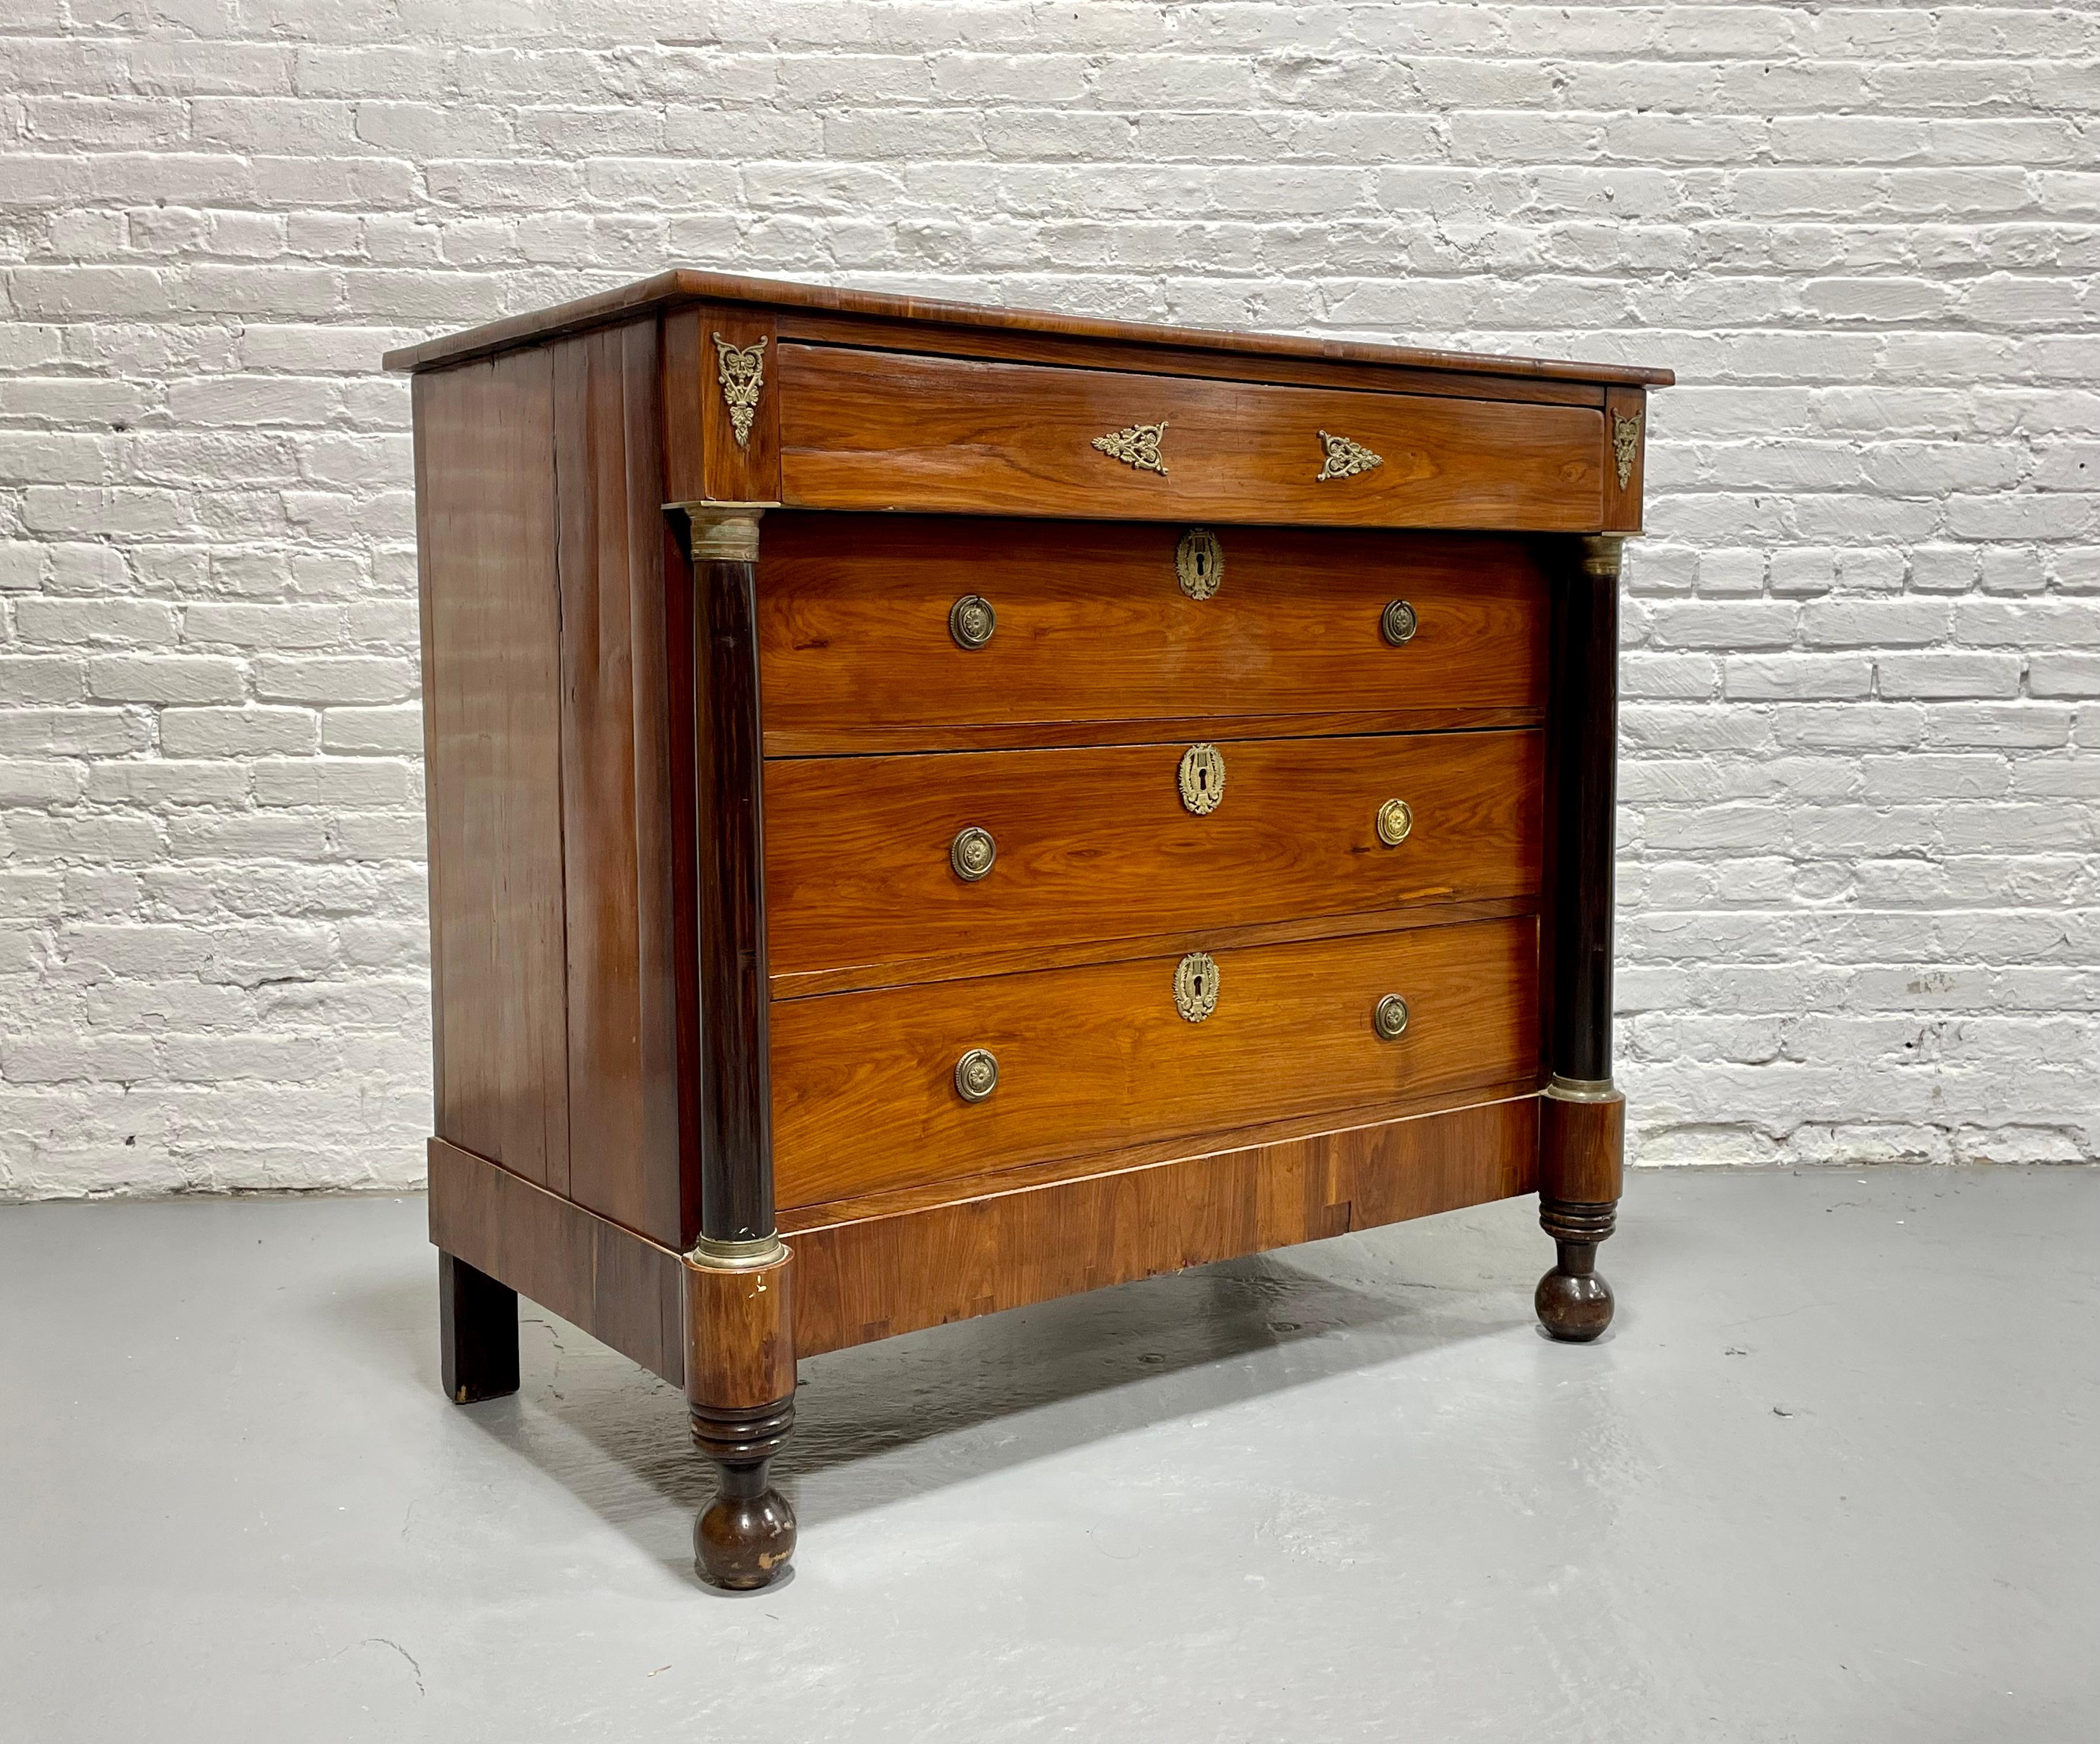 French First Empire Period Chest of Drawers / Commode / Dresser, c. 1810 In Good Condition For Sale In Weehawken, NJ